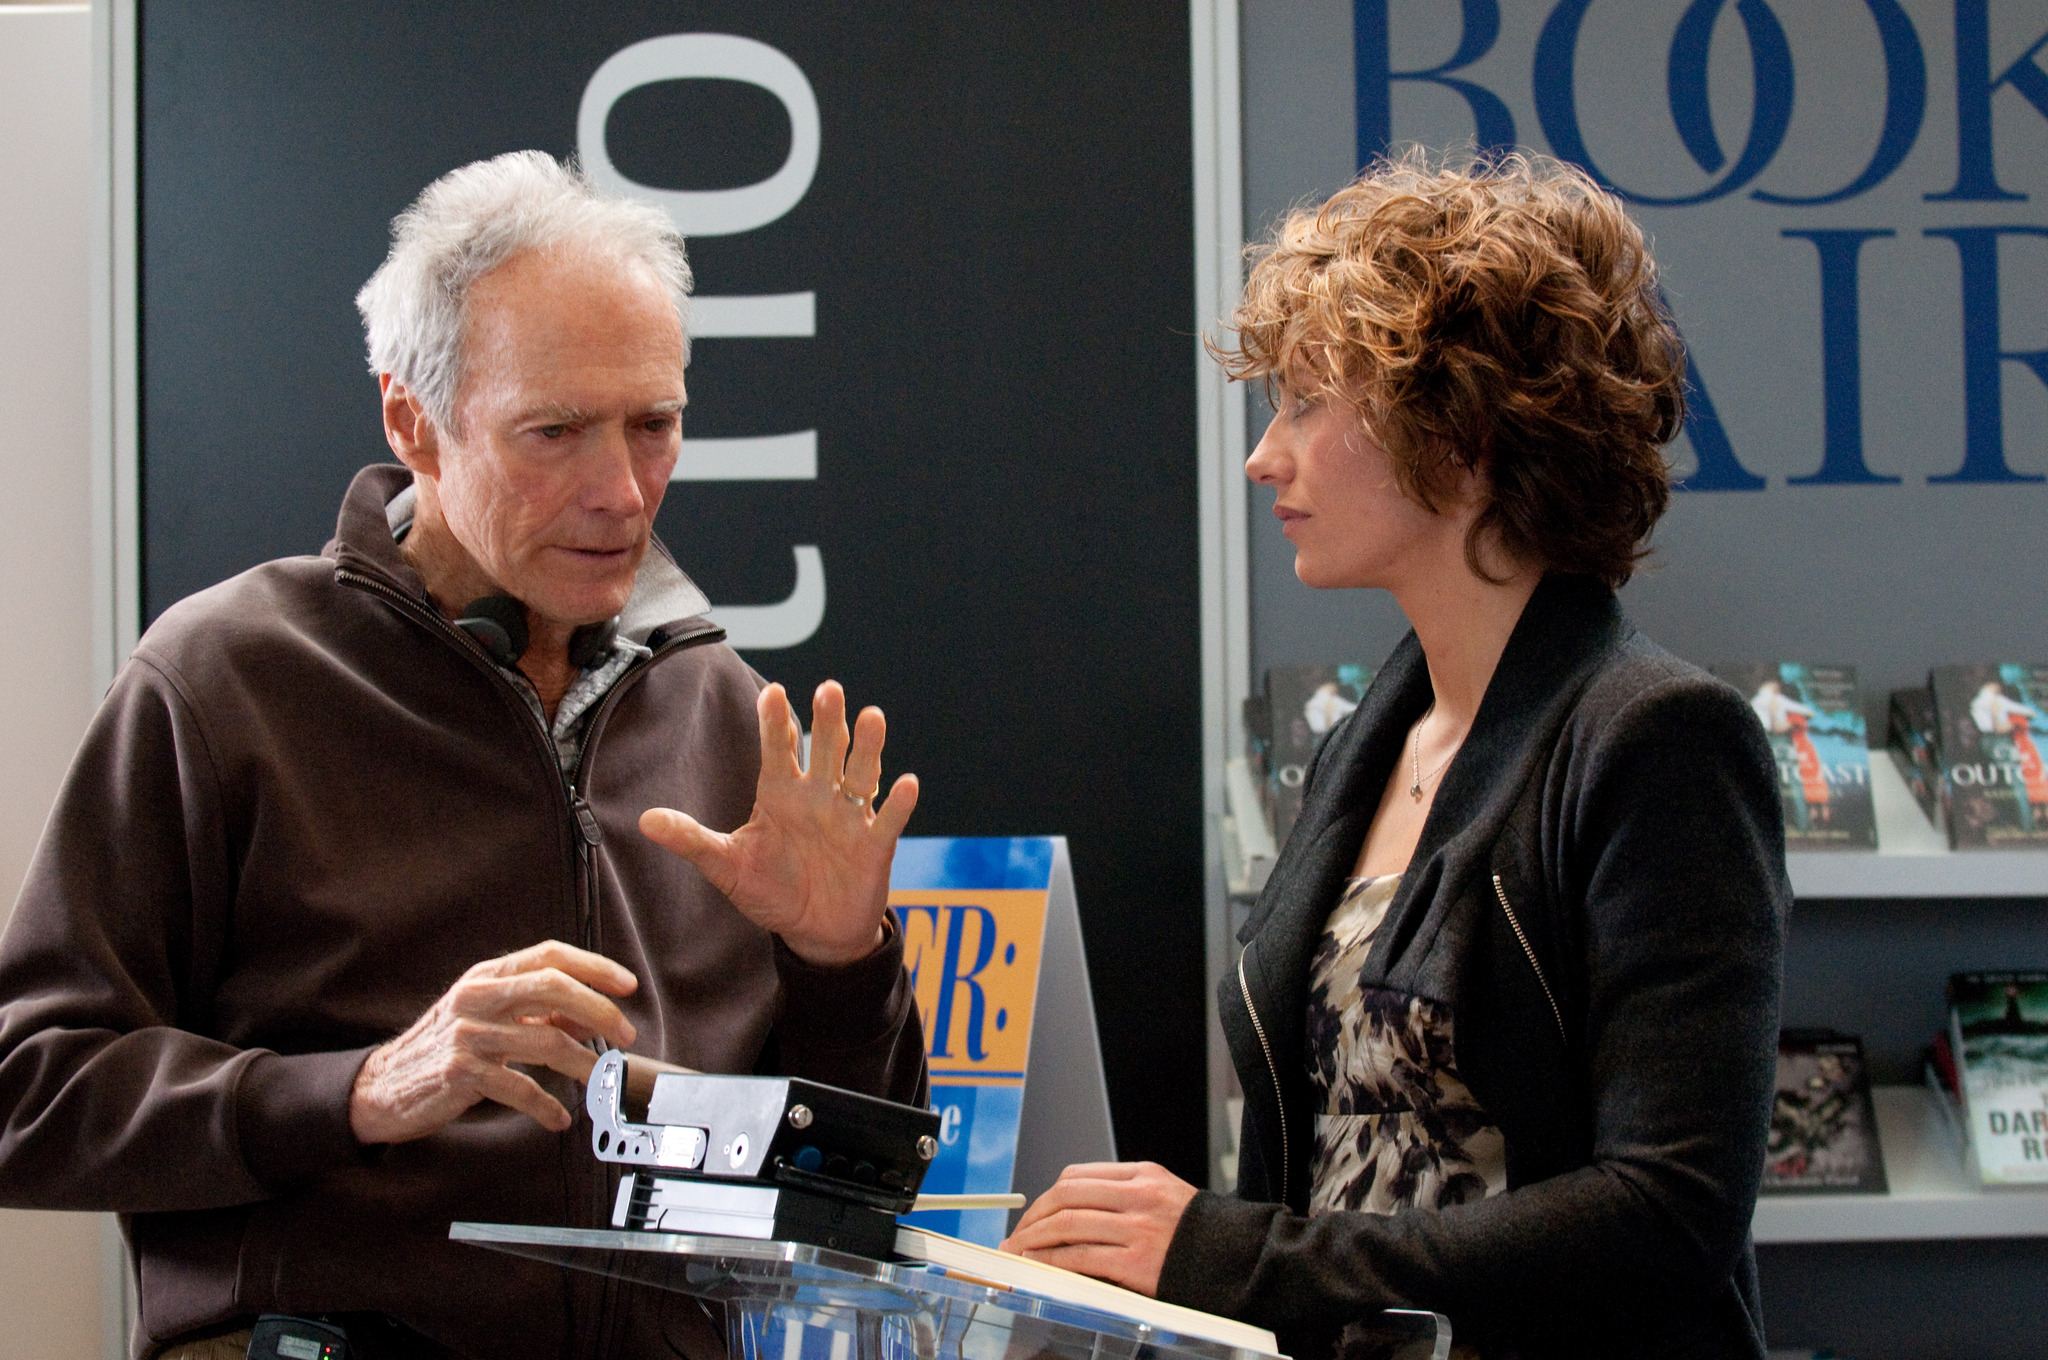 Still of Clint Eastwood and Cécile De France in Hereafter (2010)